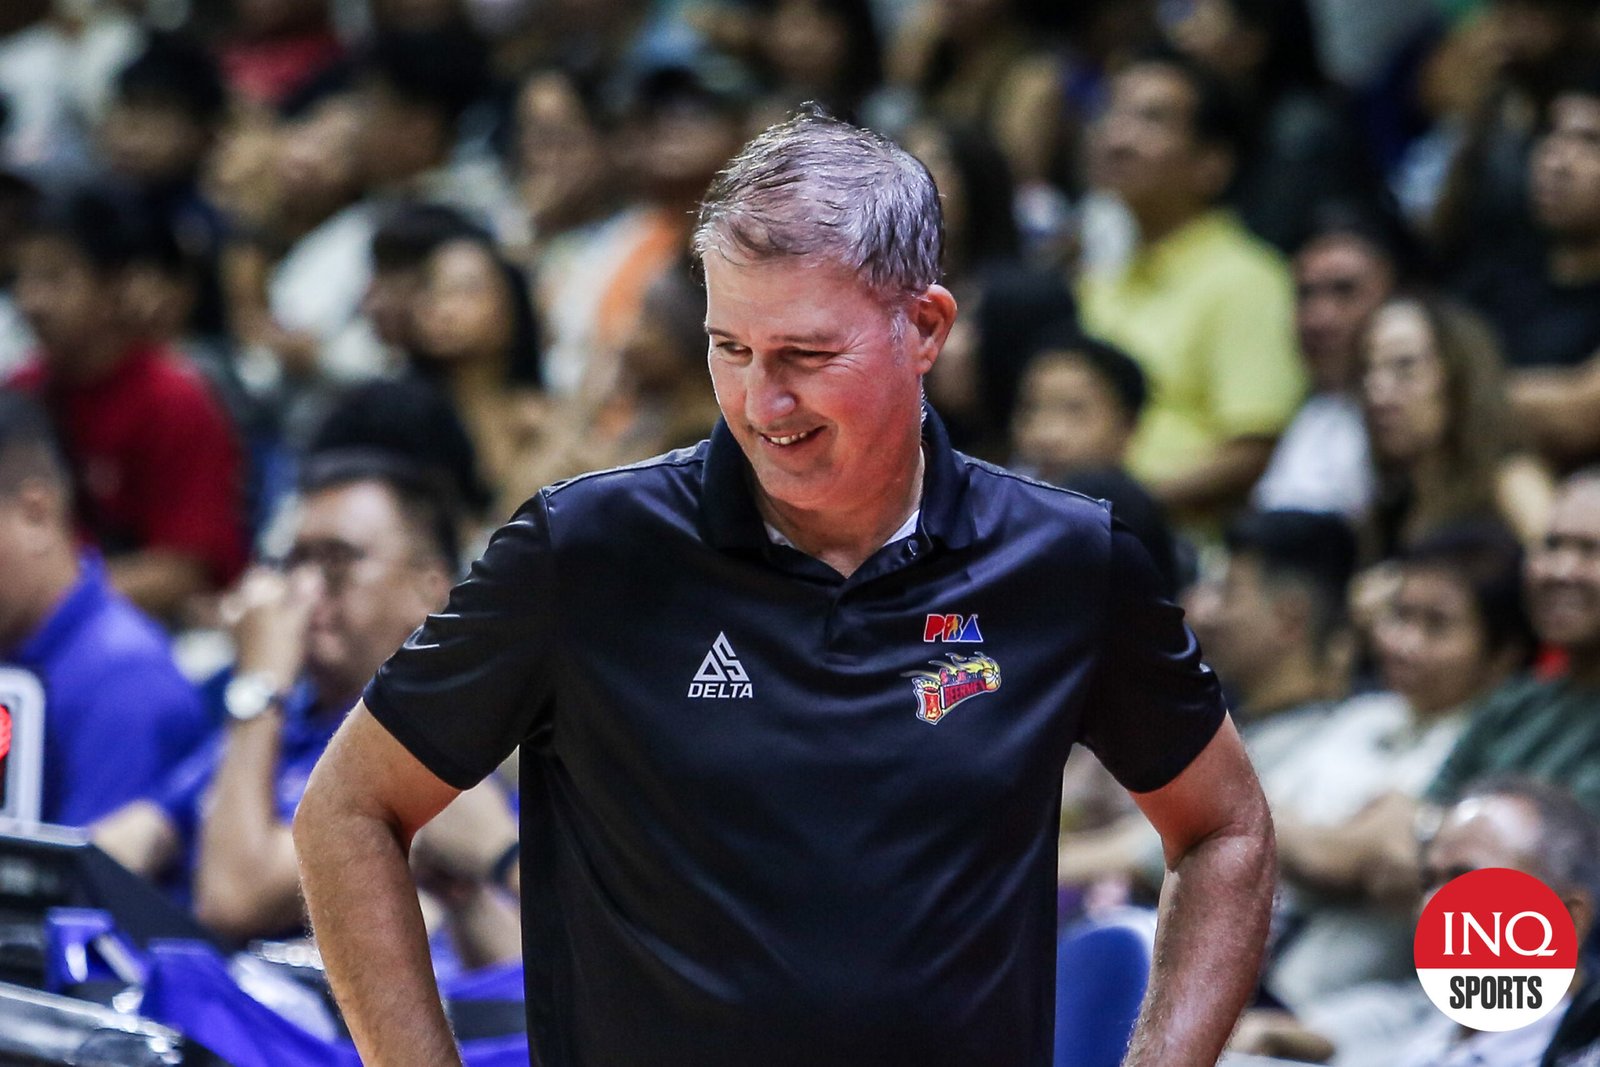 Jorge Gallent relishes PBA All-Star coaching chance